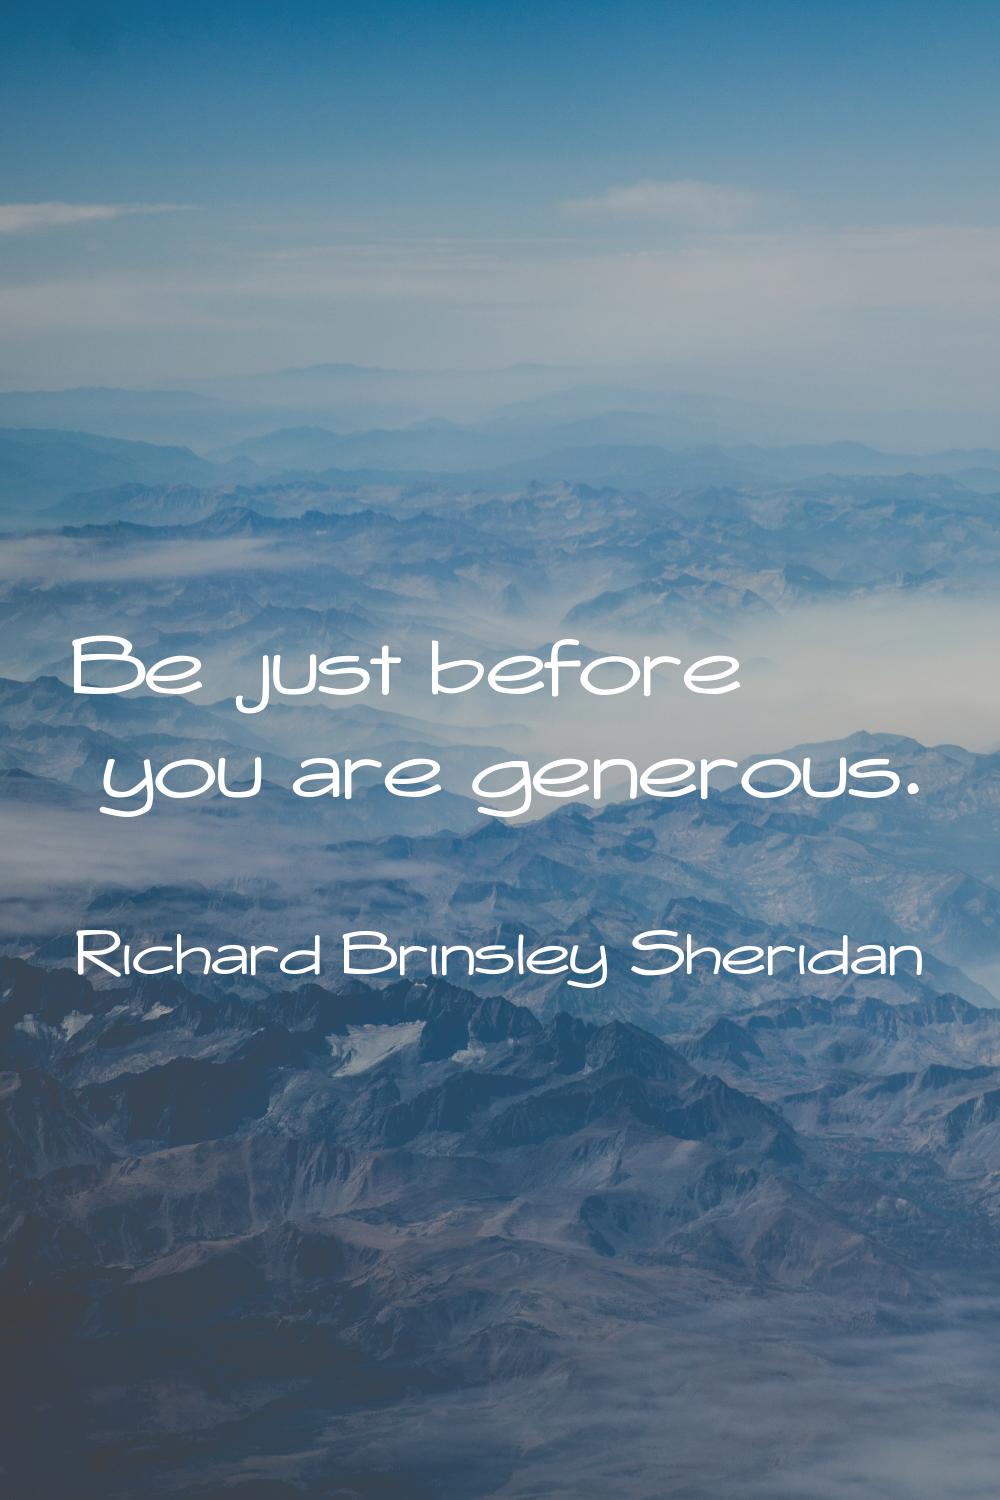 Be just before you are generous.